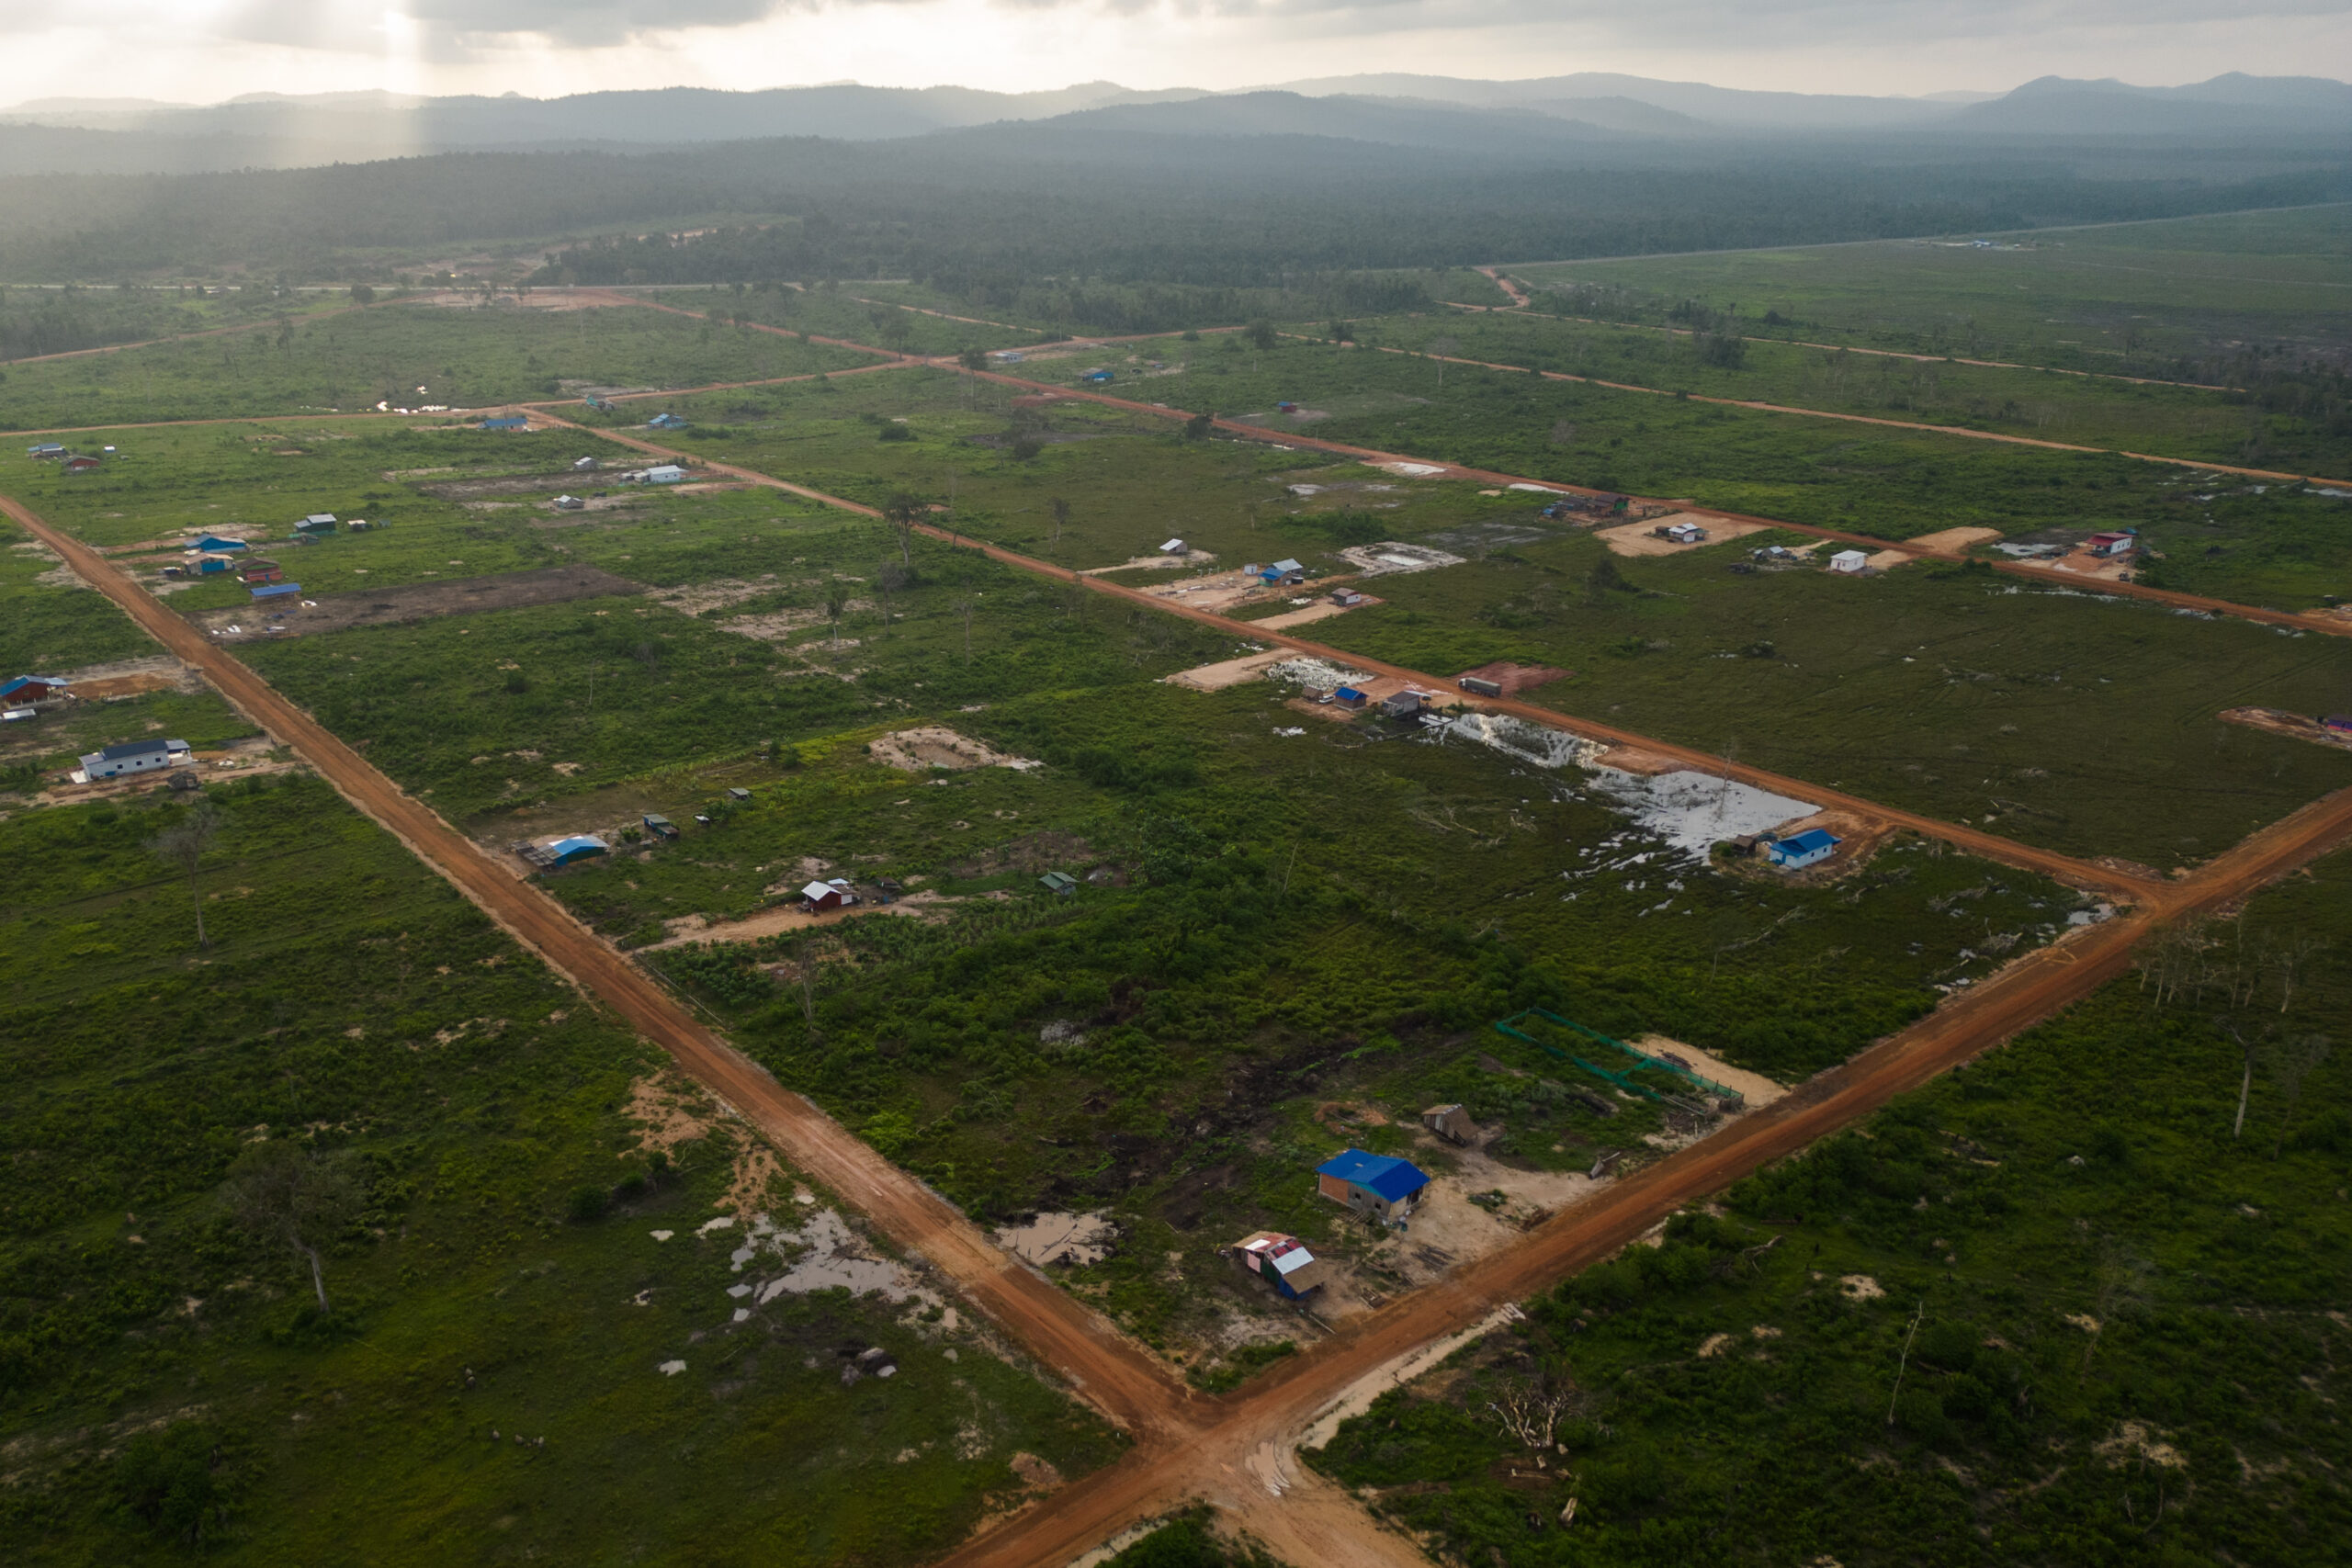 As of May 2023, when reporters visited the UDG relocation site for a second time, residents complained that the basic amenities promised by authorities as part of the relocation package had still not materialized. Photo by Gerald Flynn/Mongabay.